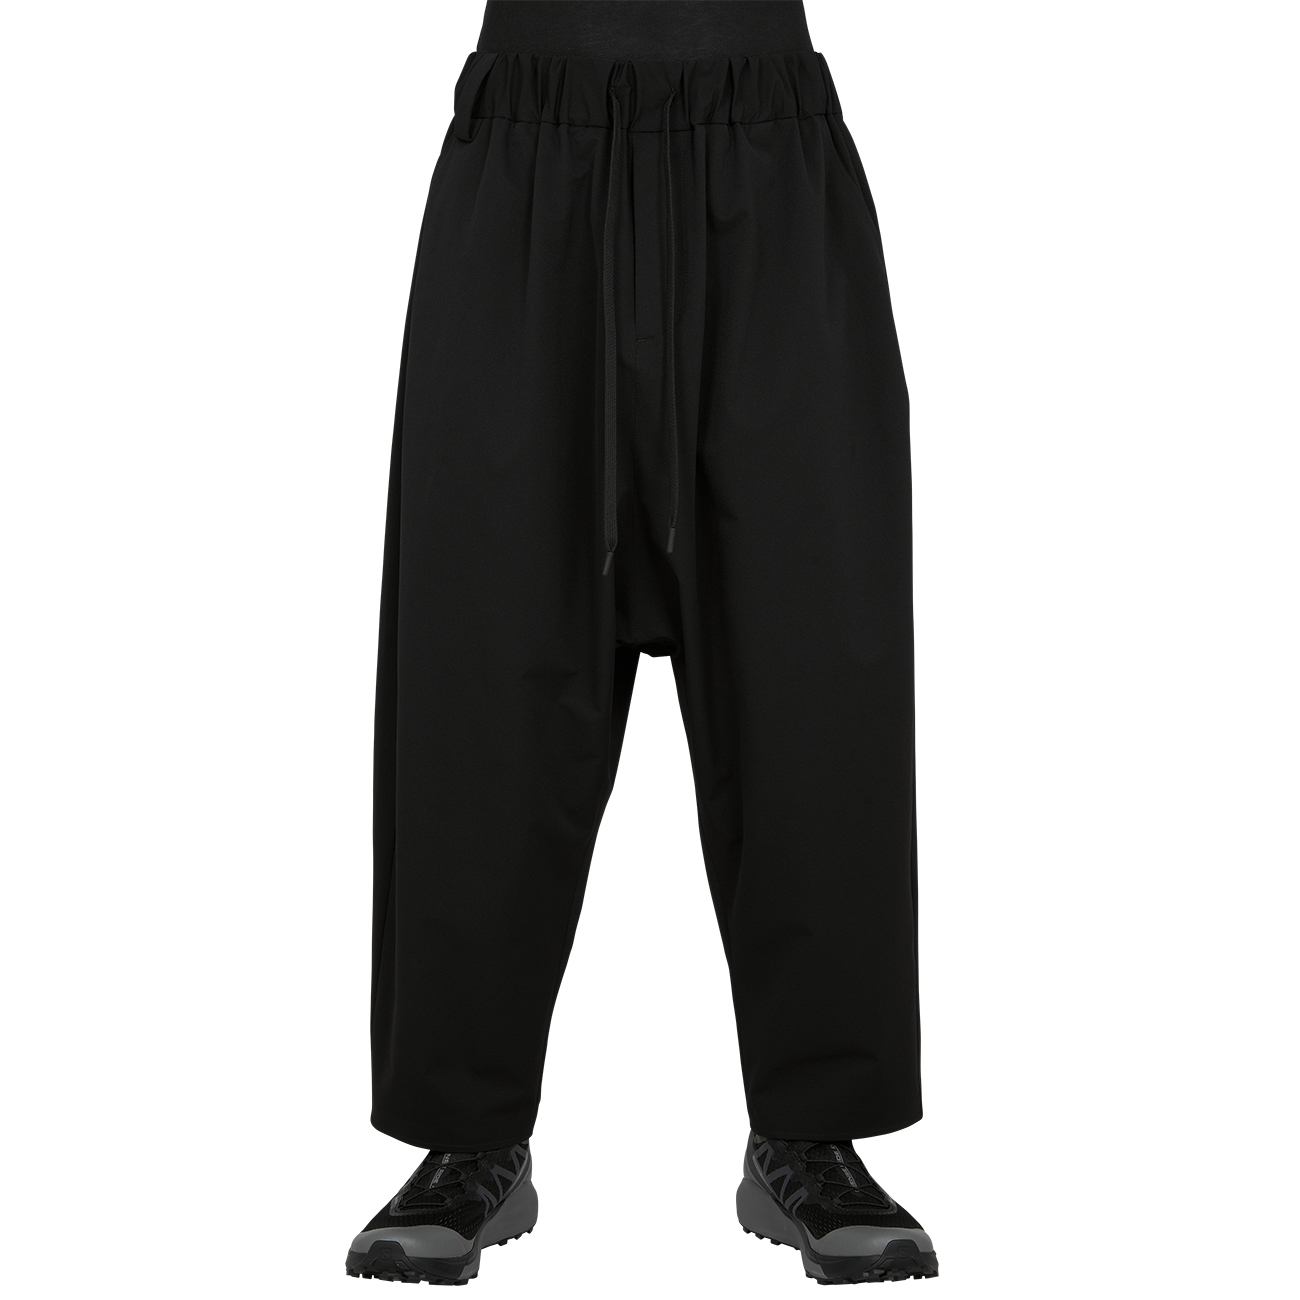 WHITE MOUNTAINEERING BLK (ホワイトマウンテニアリング ビーエルケー) - 22AW STRETCHED SARROUEL PANTS BLACKの詳細画像2